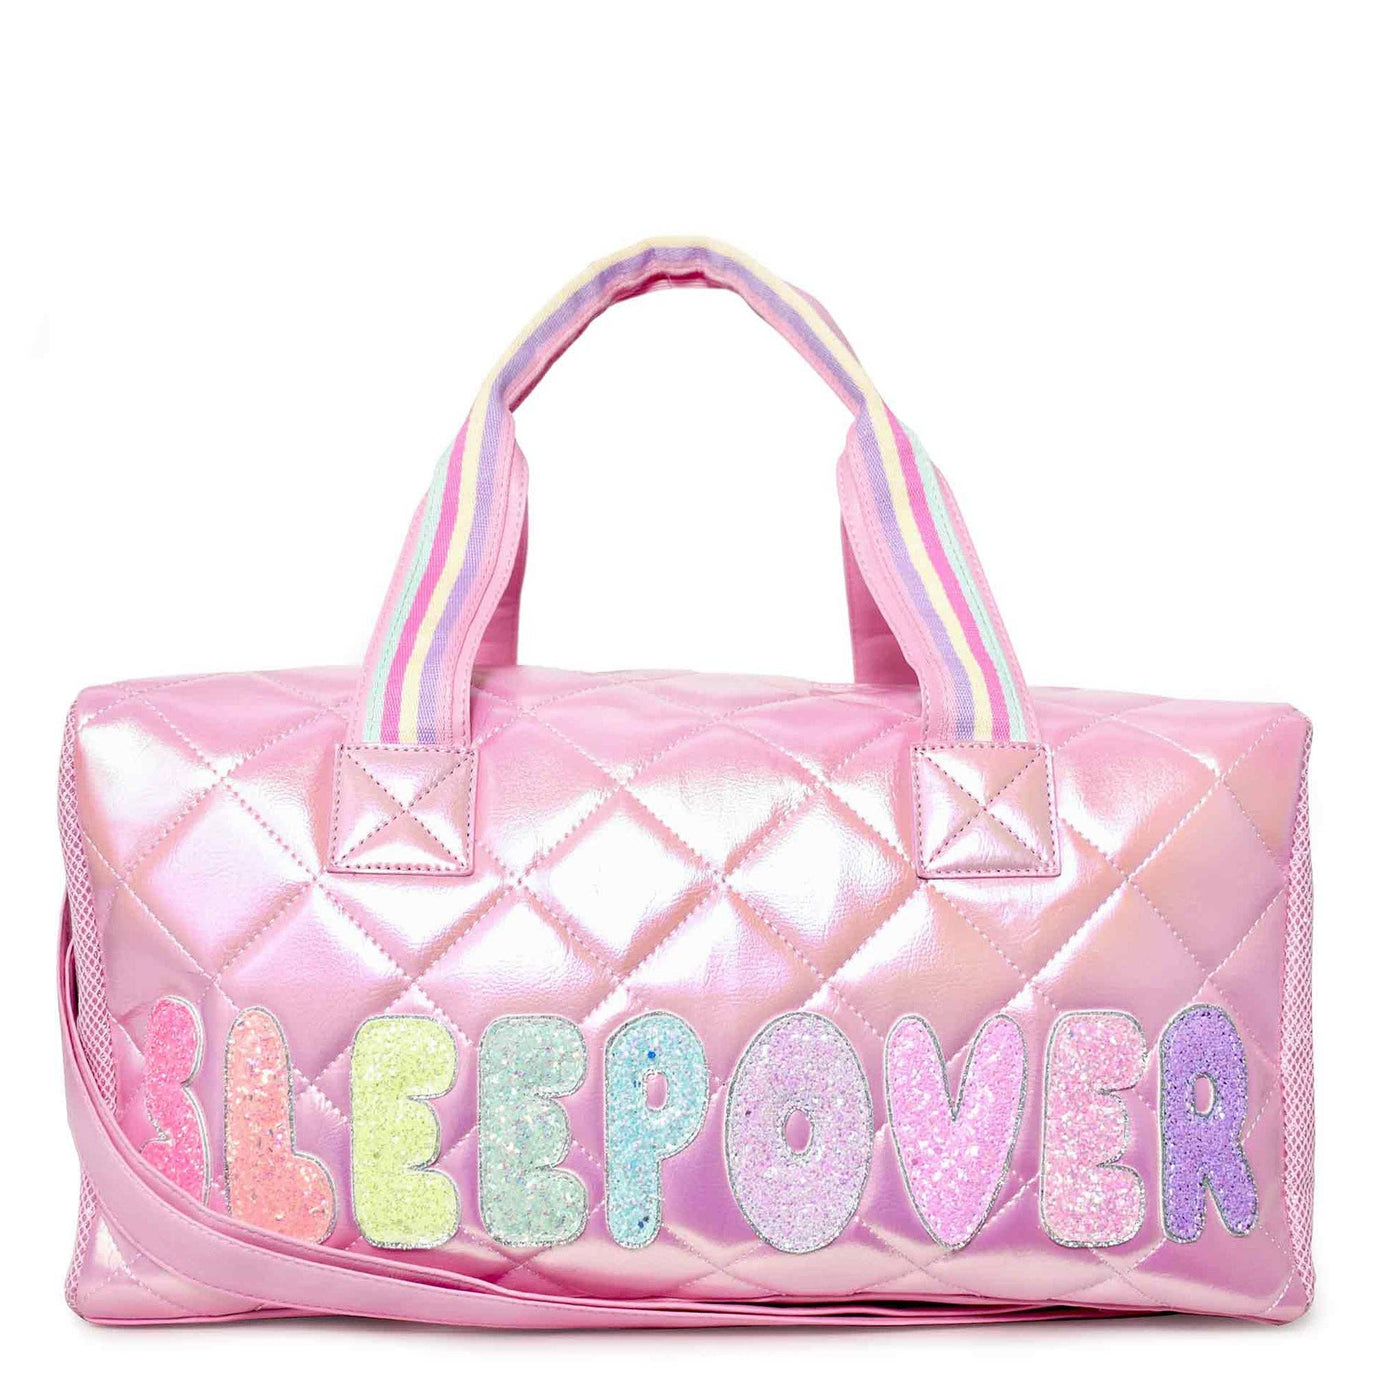 Miss Gwen's OMG Accessories - 'Sleepover' Metallic Quilted Large Duffle Bag